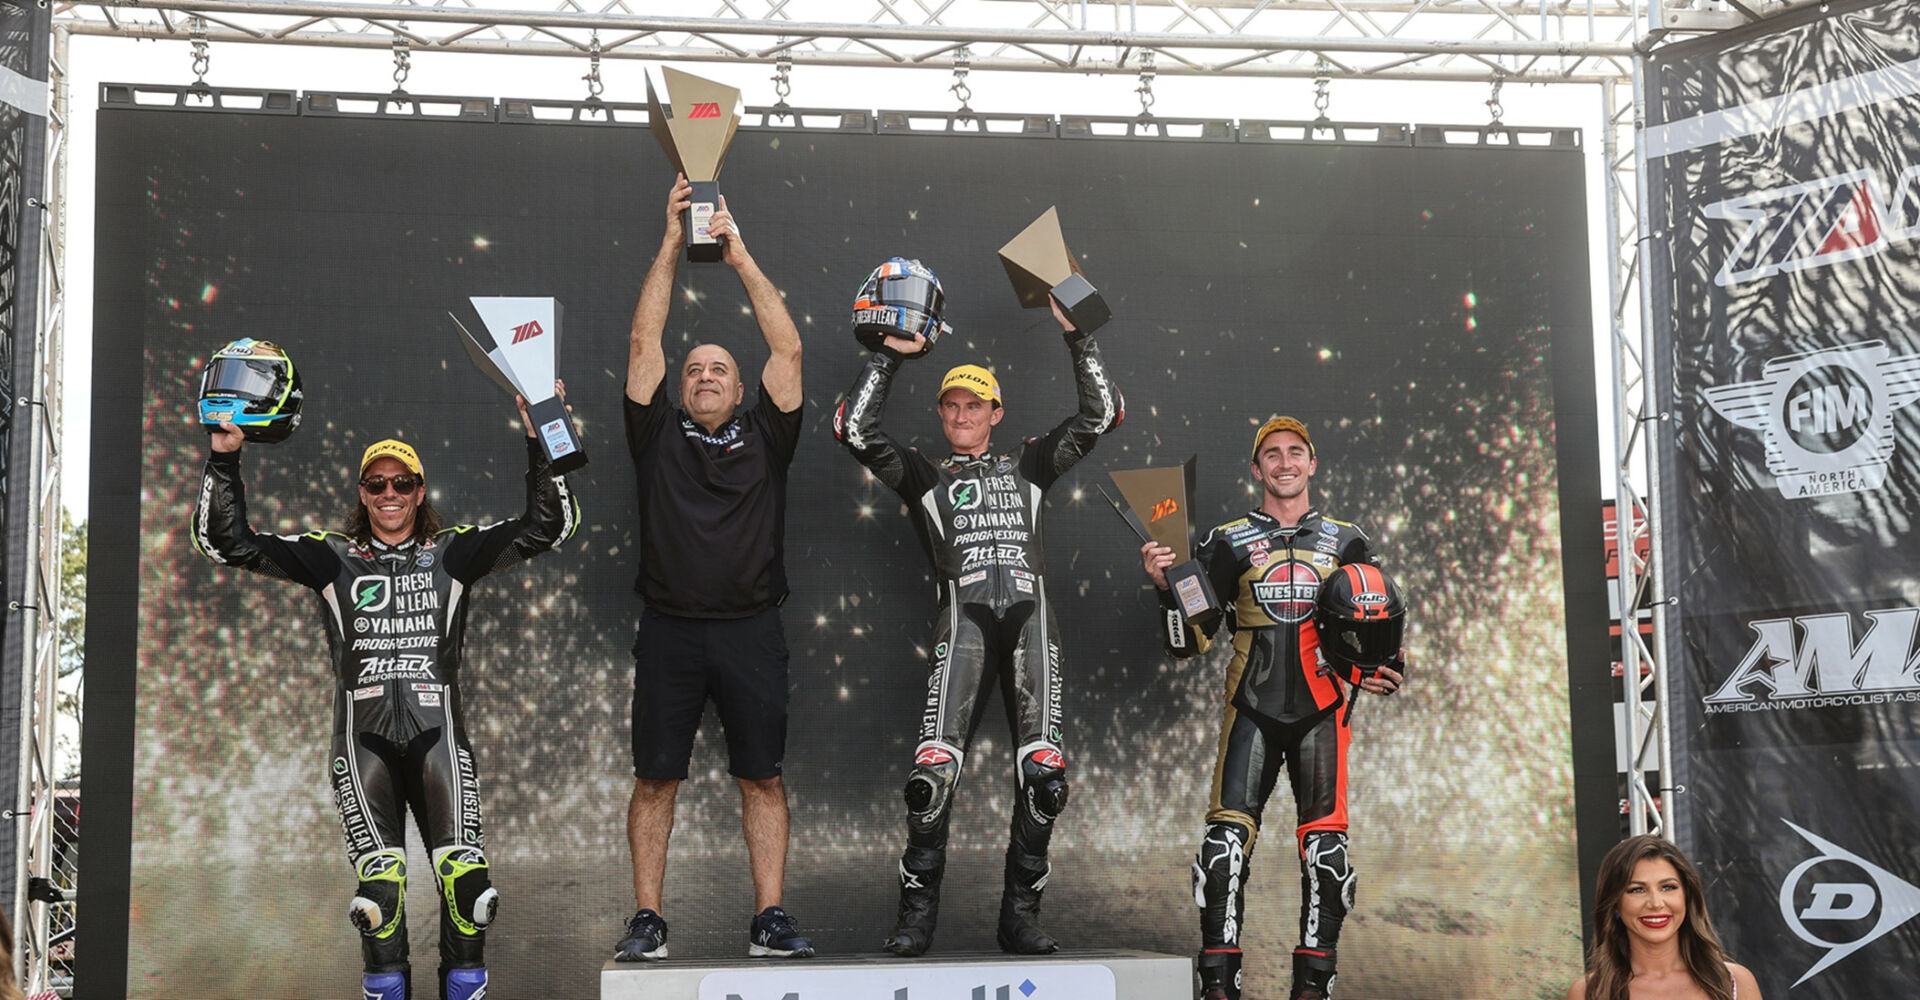 Richard Stanboli (second from left) with Cameron Peterson (far left), Jake Gagne (second from right) and Matthew Scholtz (far right) on the MotoAmerica Superbike podium after Race One at New Jersey Motorsports Park. Photo by Brian J. Nelson.